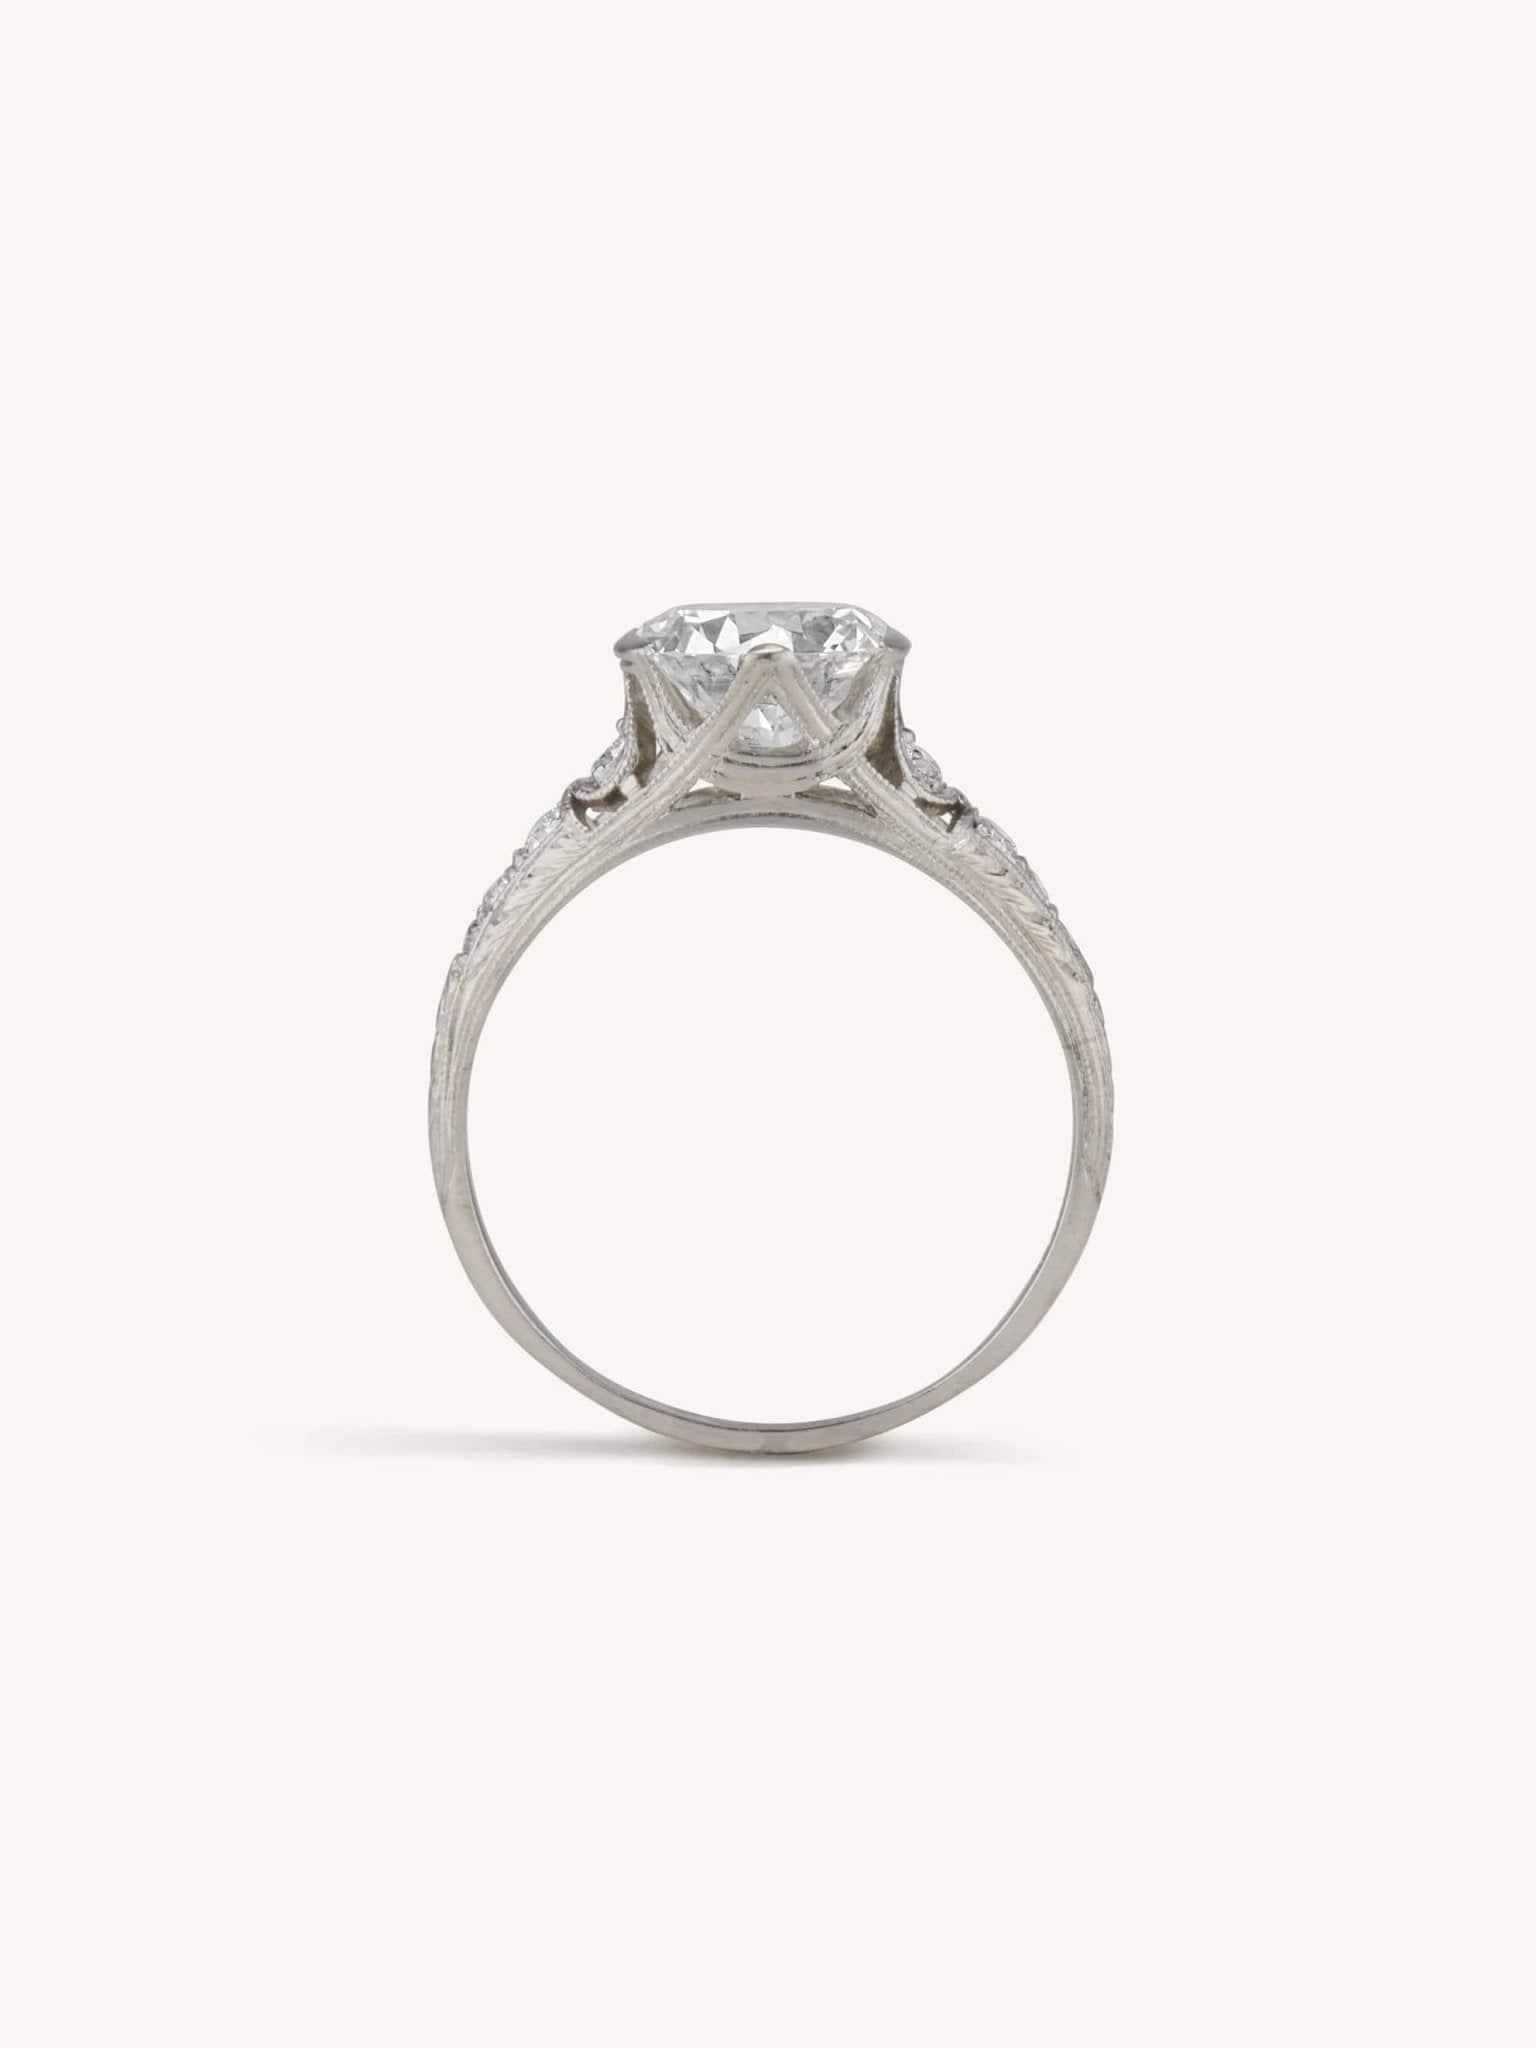 $161,000 Tiffany & Co Platinum & Round Diamond Solitaire Engagement Ring  3.10ct - Ideal Luxury